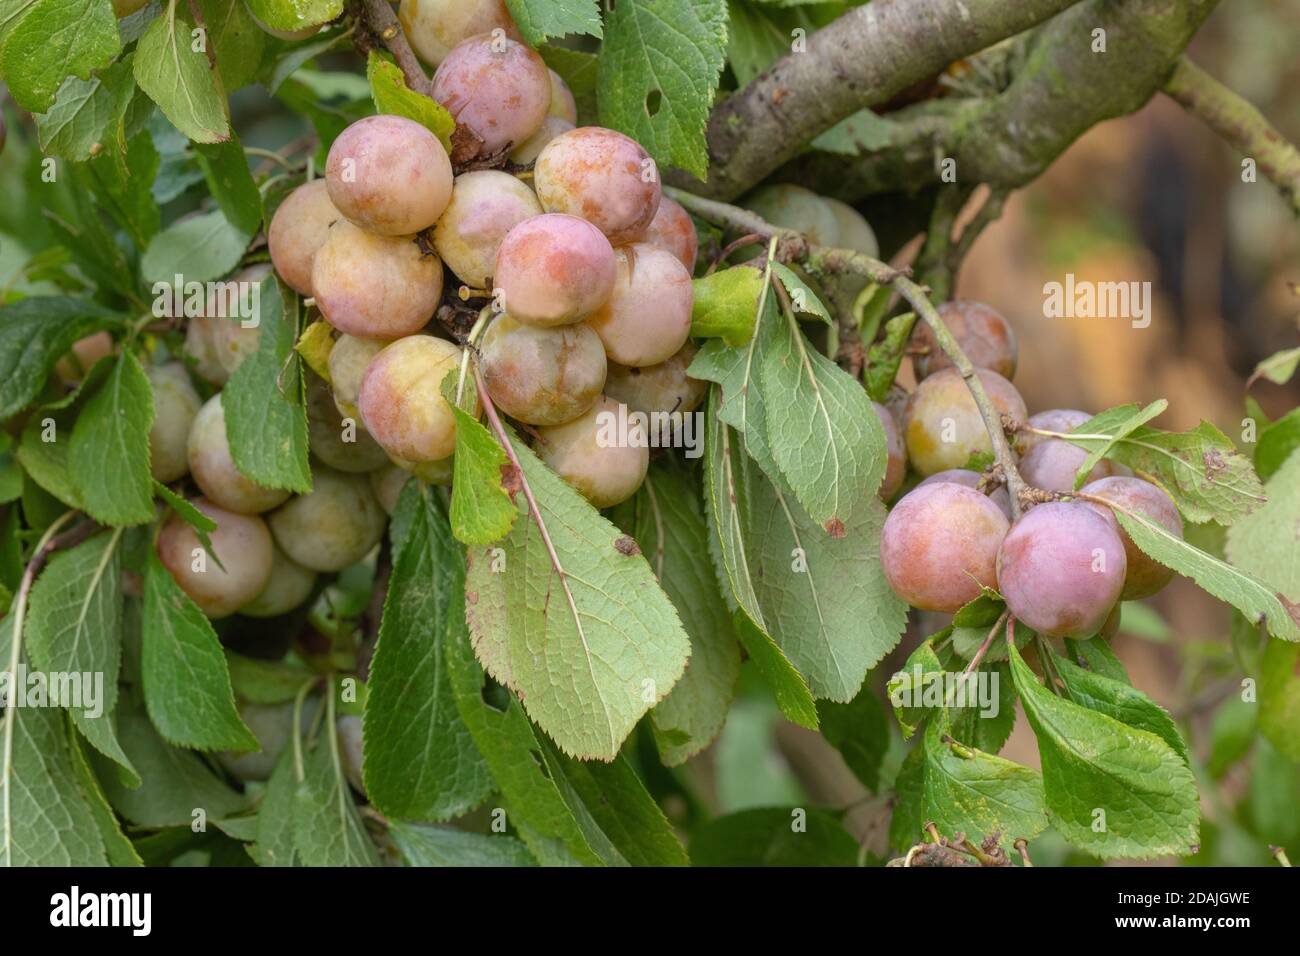 Cherry or Myrobalan Plums (Prunus cerasifera). Cultivated in Europe for 400 years. Naturalized in UK. Found growing in hedgerows. Norfolk. East Anglia Stock Photo